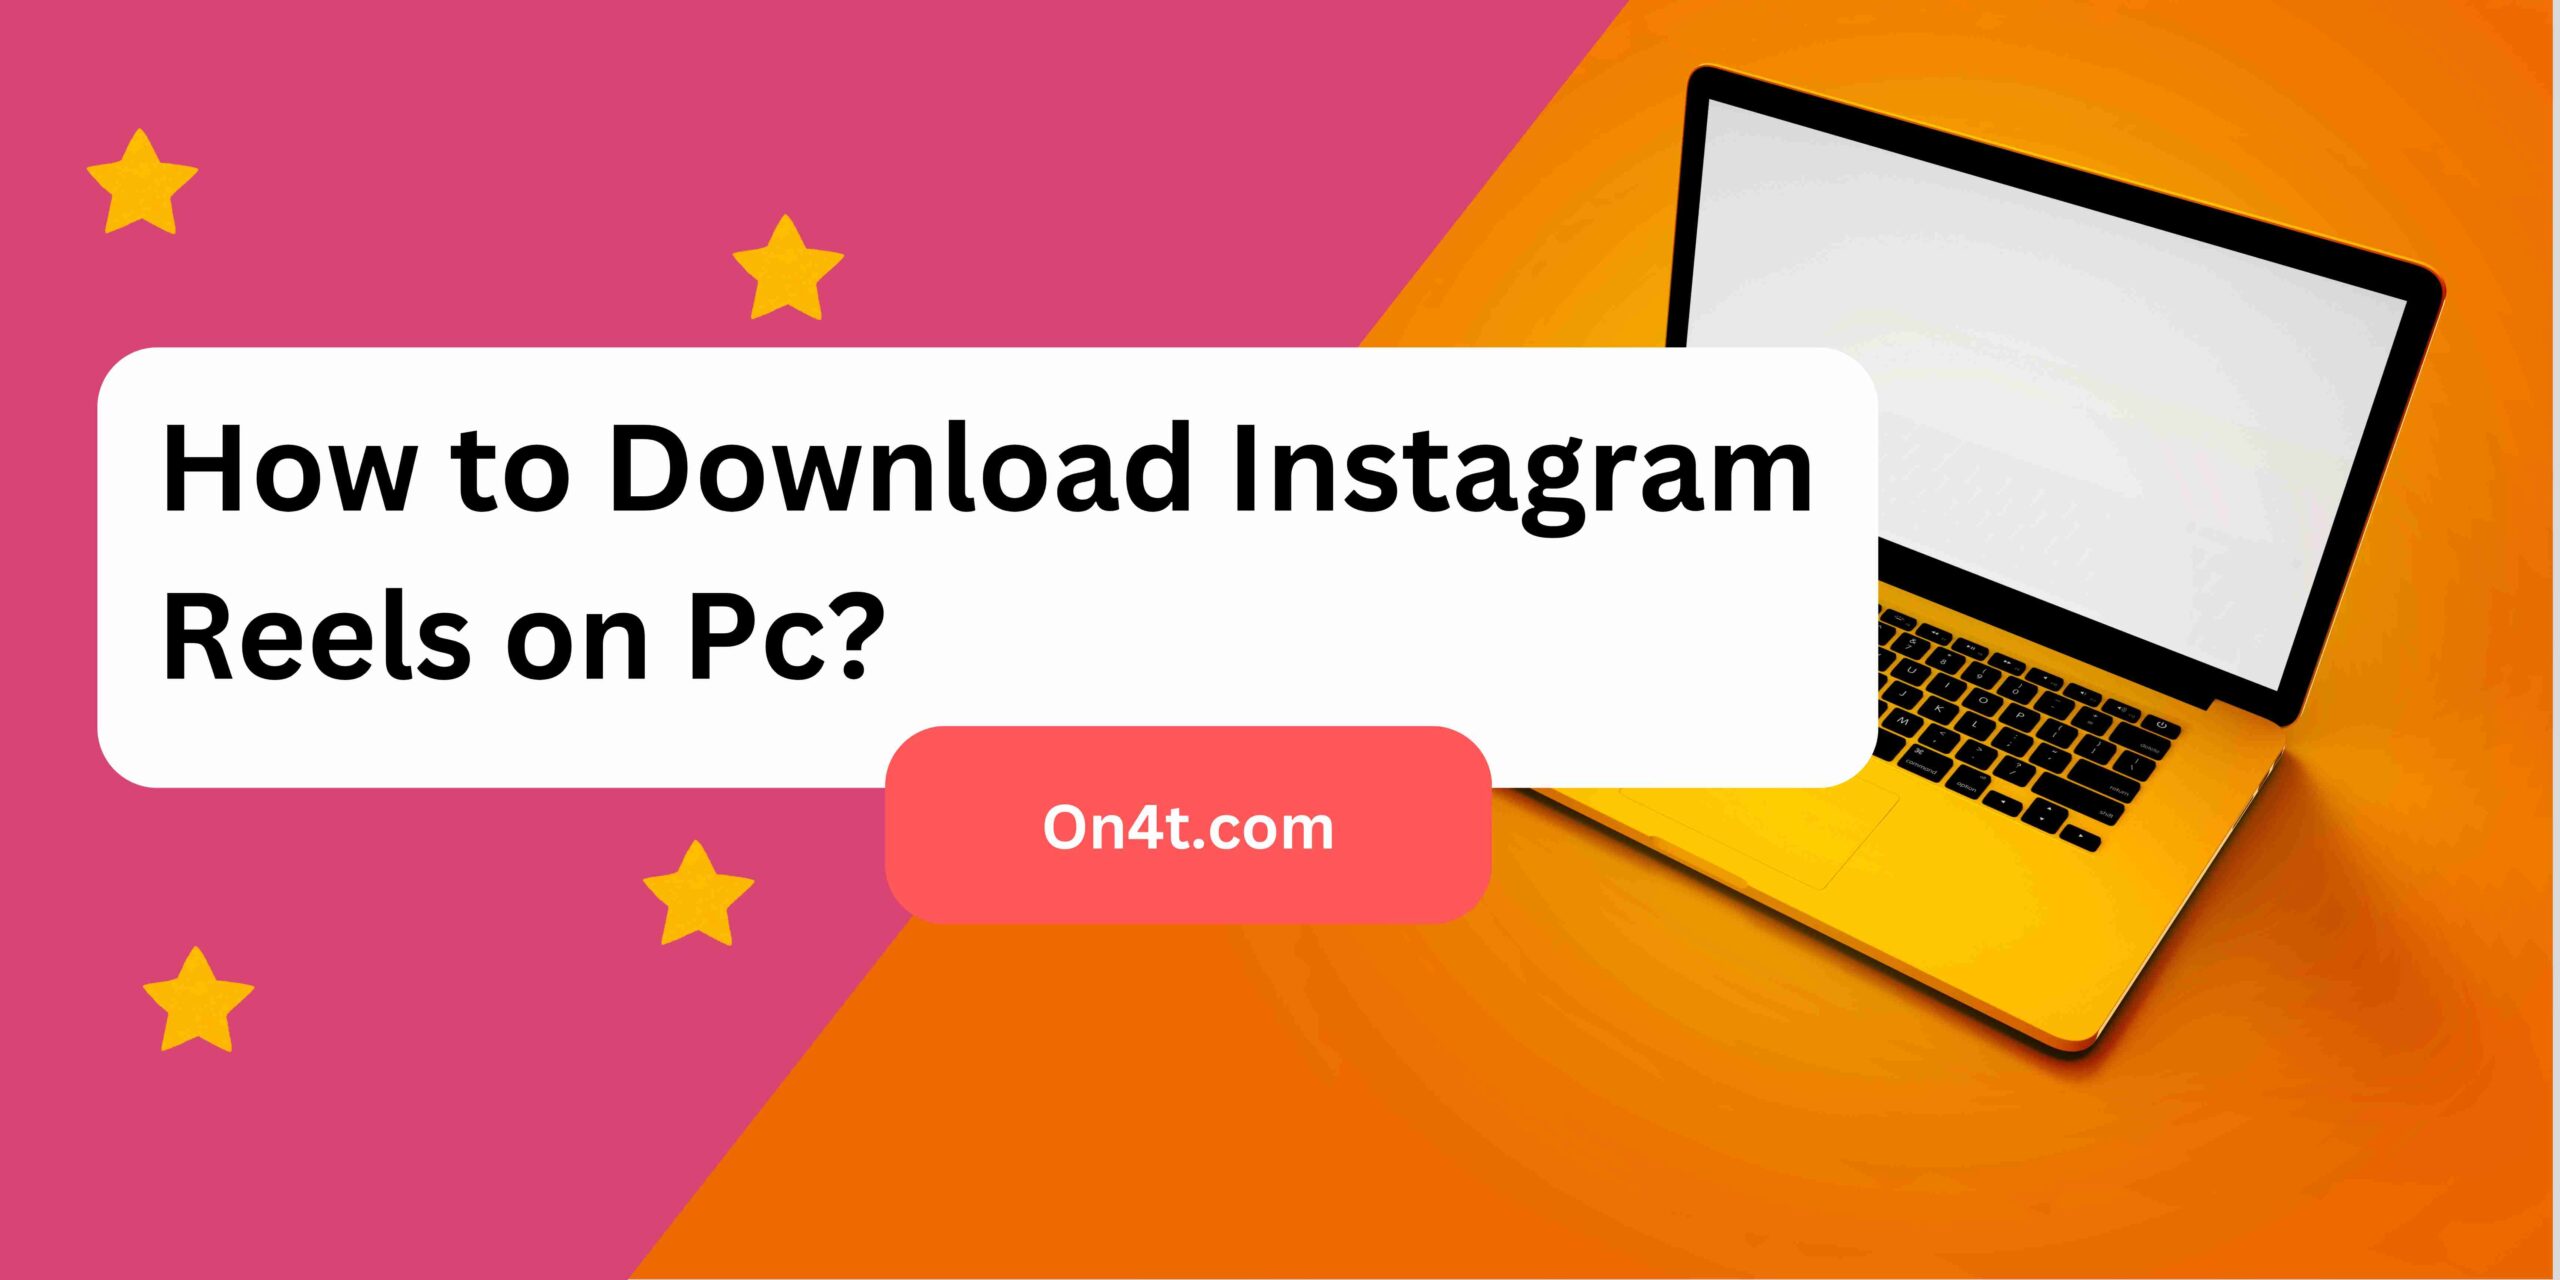 How to Download Instagram Reels on Pc?